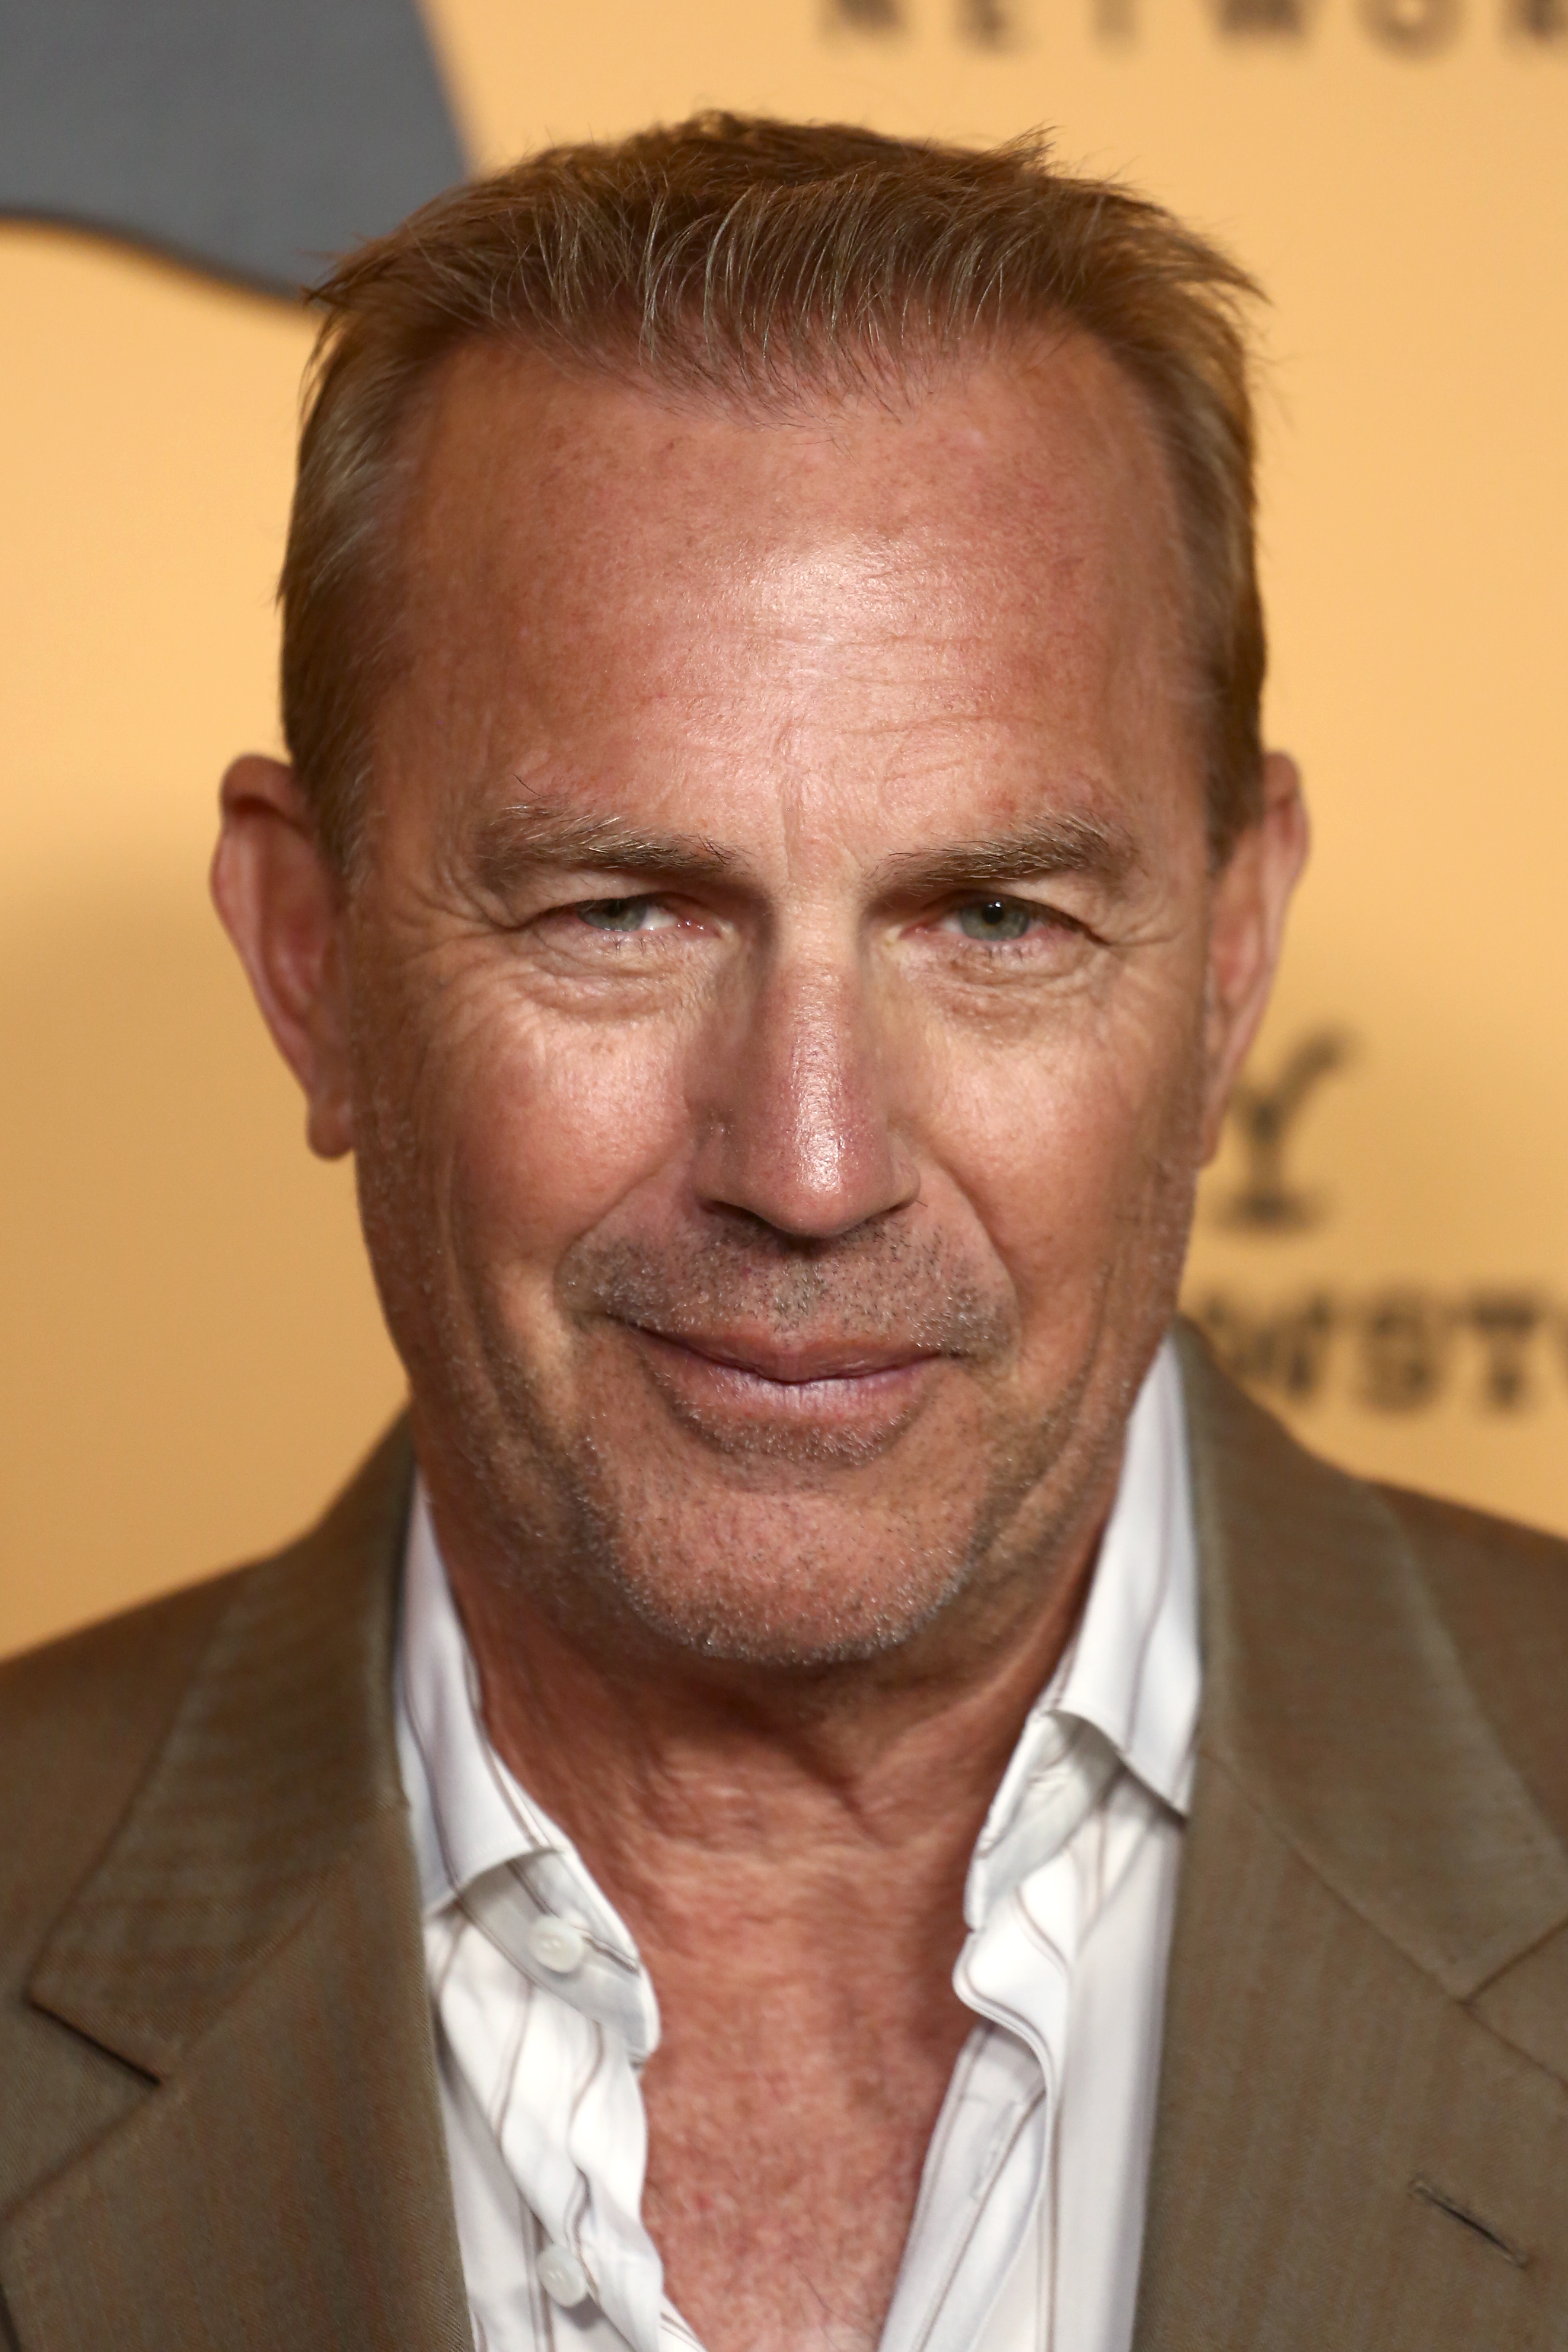 Kevin Costner at the premiere party for "Yellowstone" Season 2 at Lombardi House on May 30, 2019 in Los Angeles, California. | Source: Getty Image